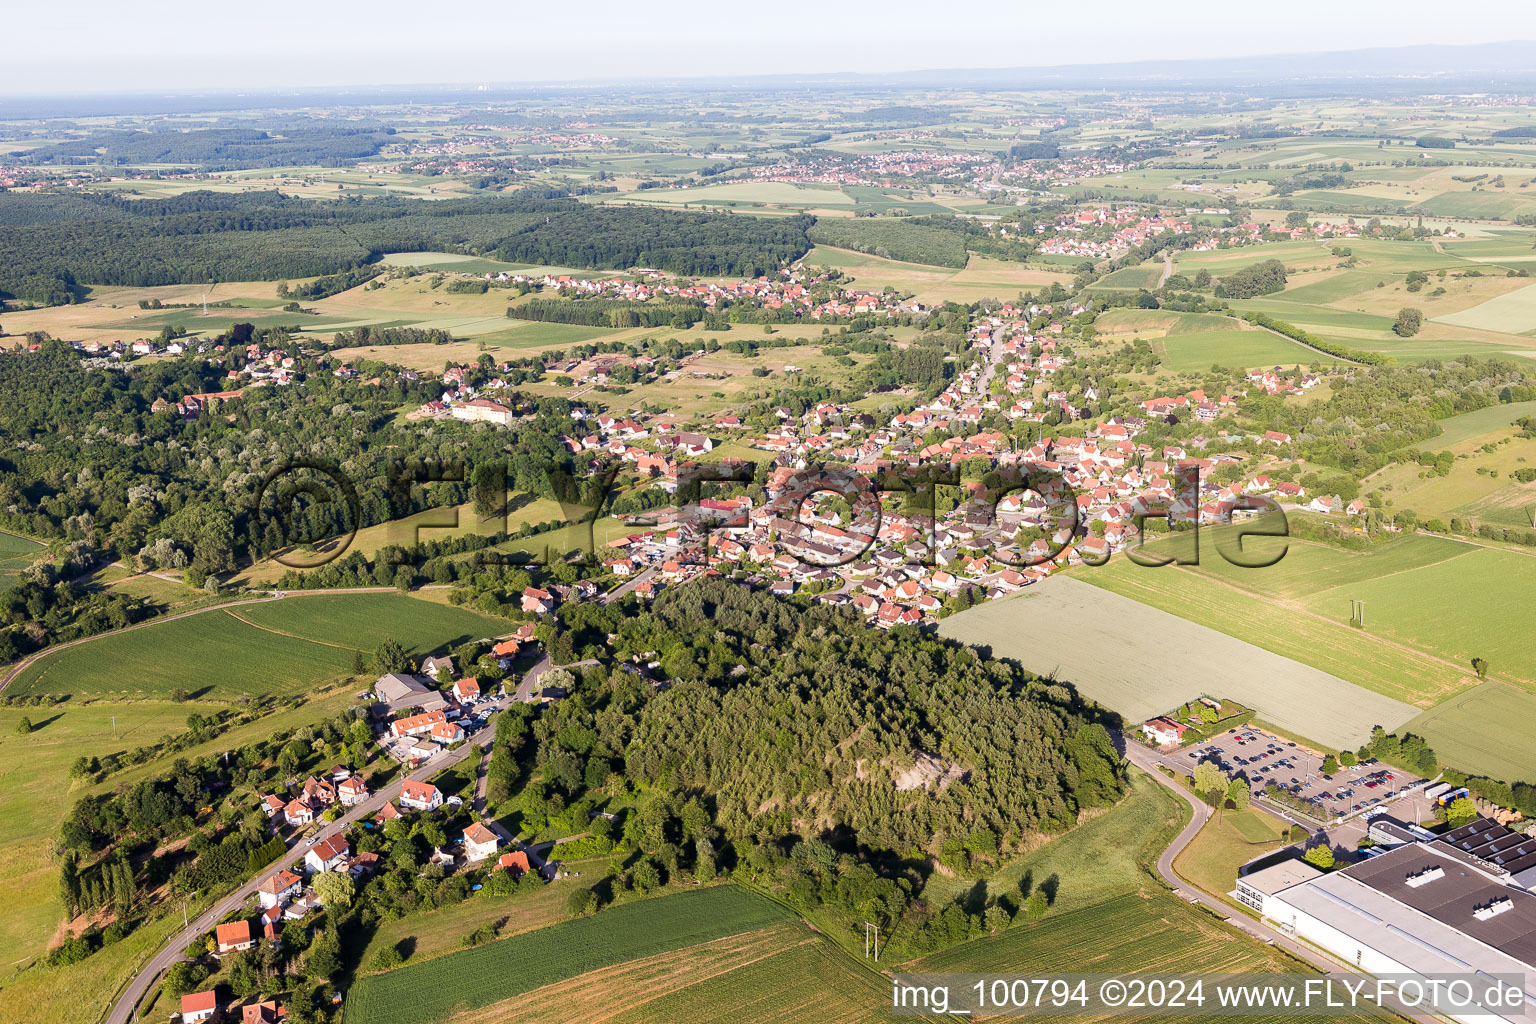 Town View of the streets and houses of the residential areas in Merkwiller-Pechelbronn in Grand Est, France